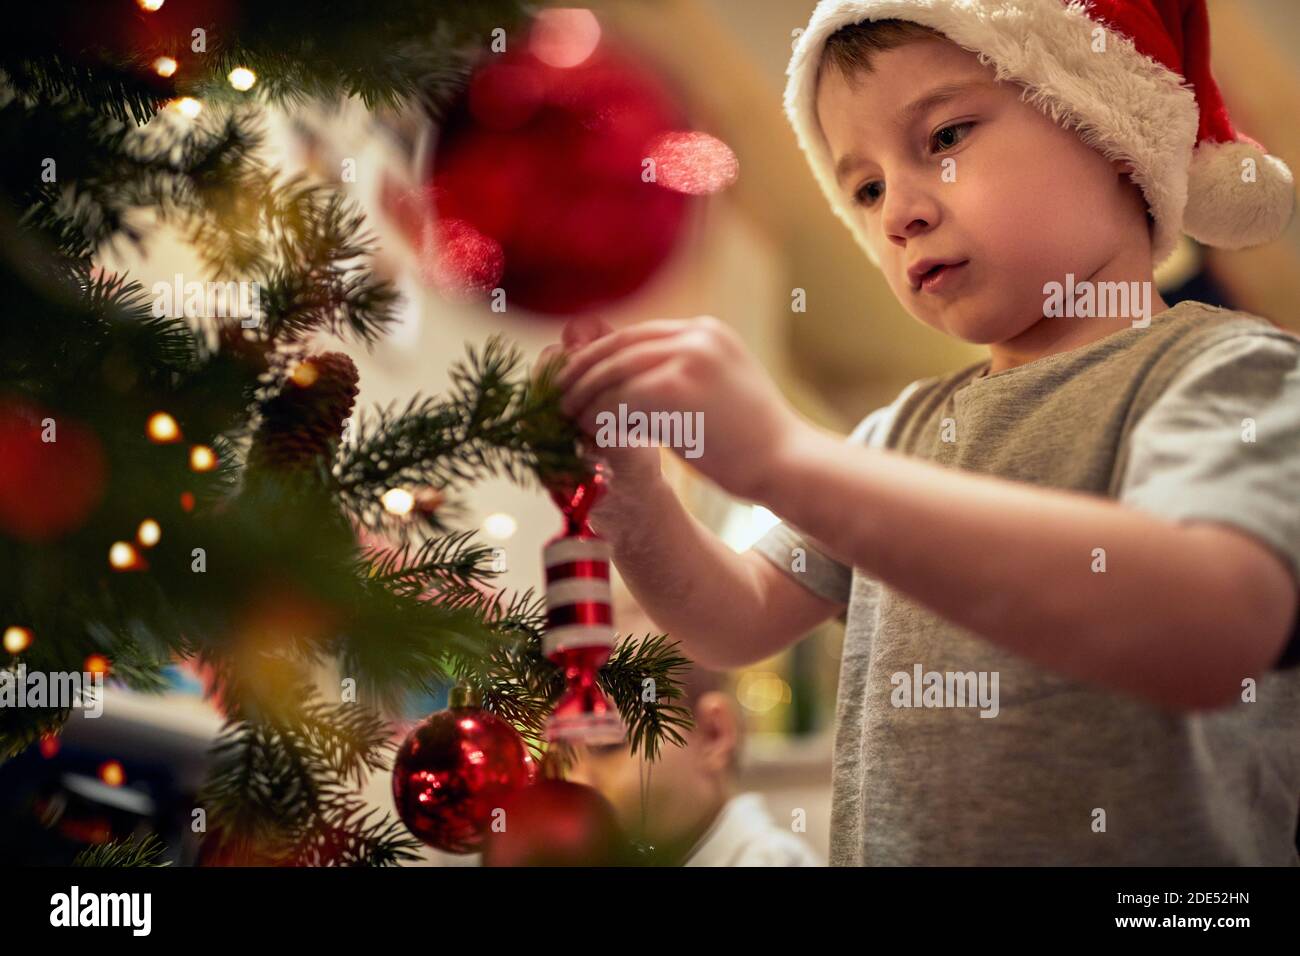 Kids participating in Christmas tree decoration in a holiday atmosphere at home. Together, New Year, family, celebration Stock Photo